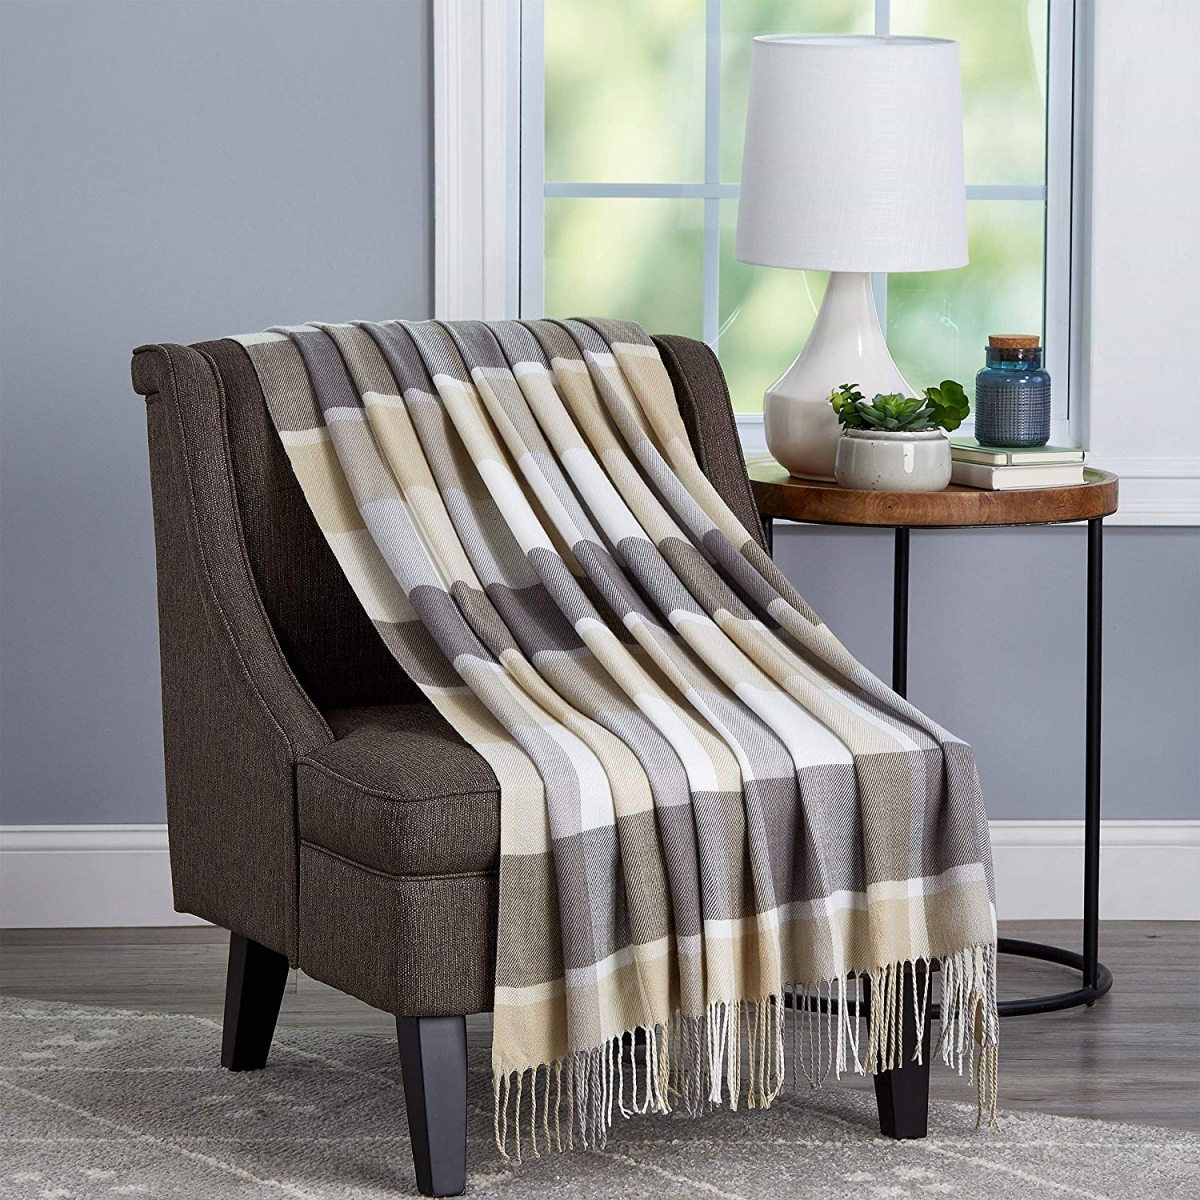 66a-29232 Oversized Vintage Look Woven Acrylic Faux Cashmere-feel Plaid Throw - Stone